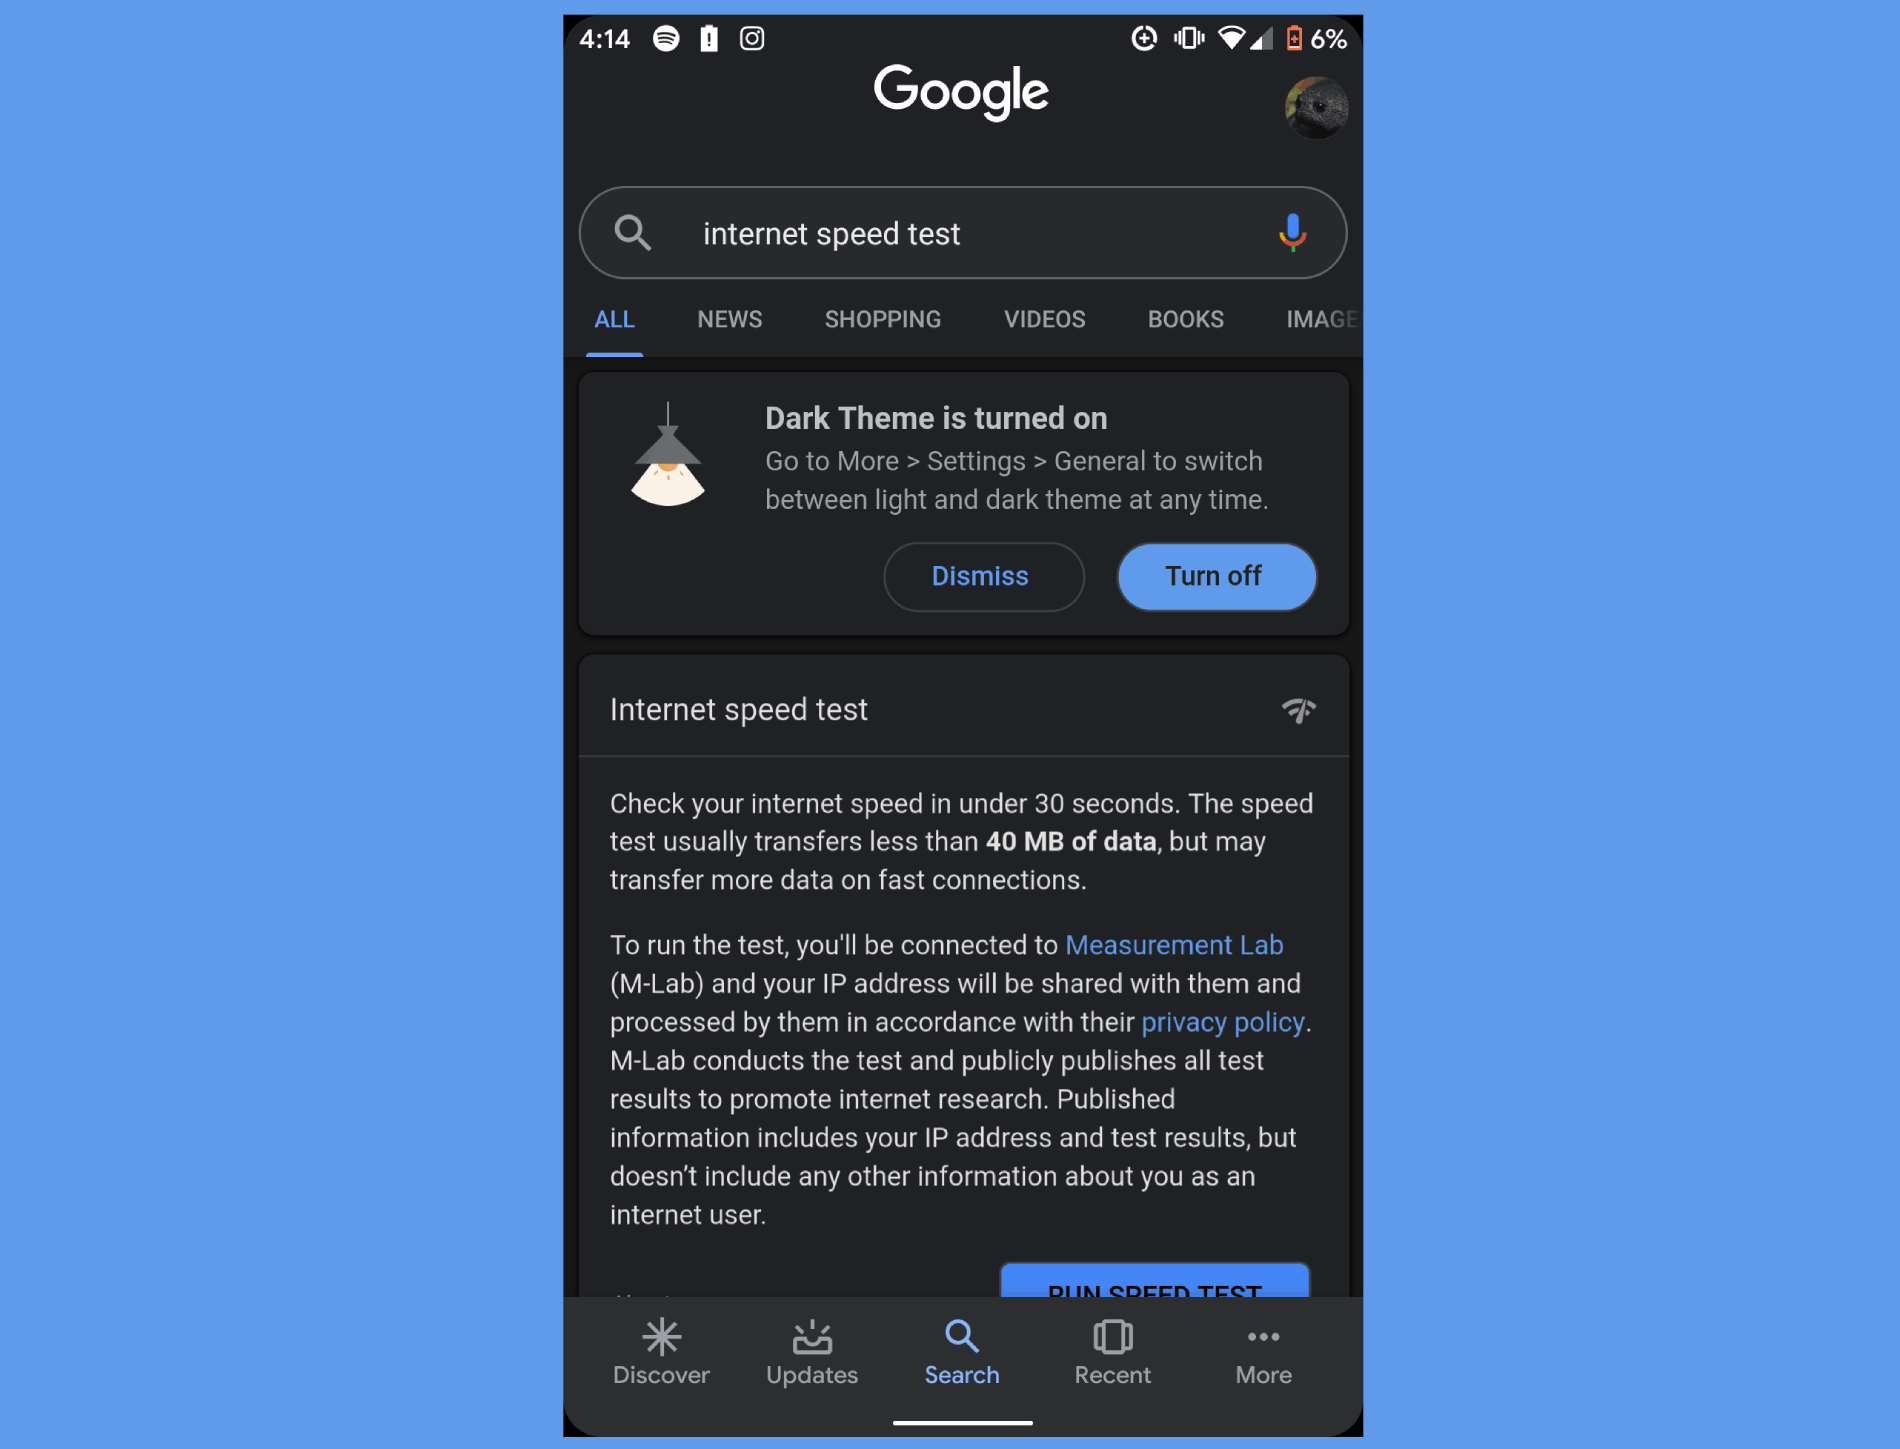 Google is testing a dark mode for Search and Discover App